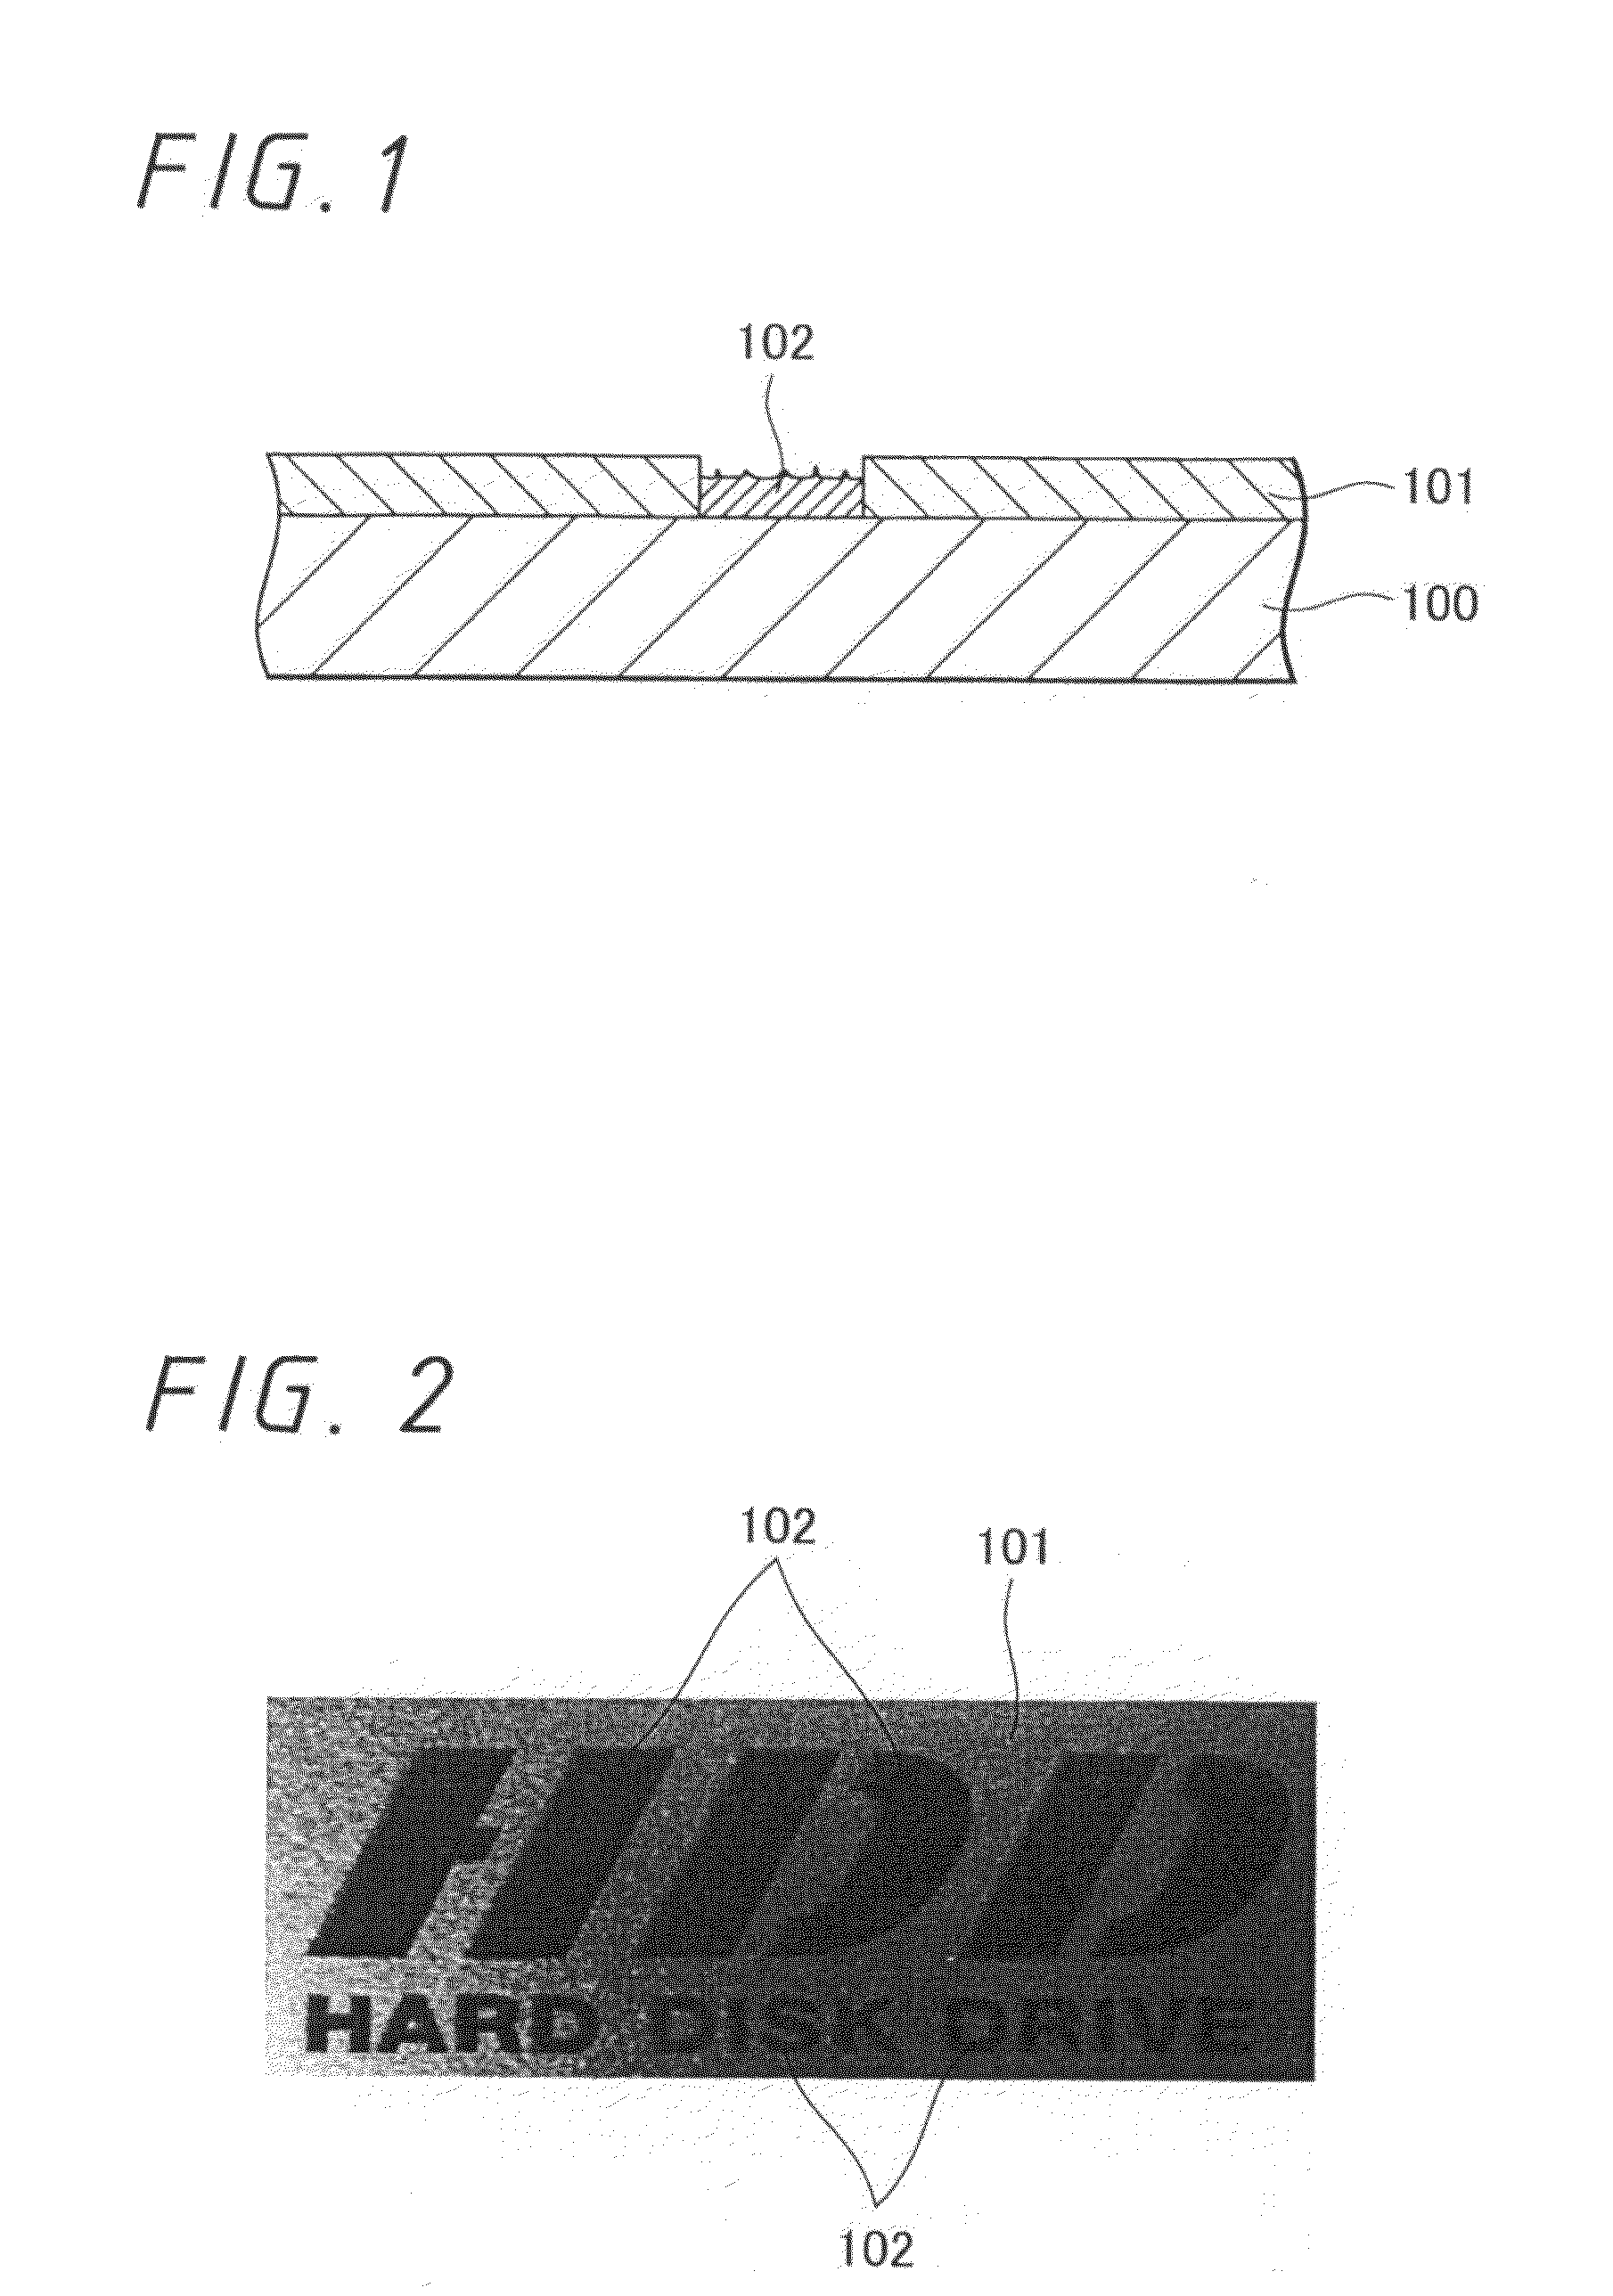 Coated-product with marking, process for manufacturing the same, and enclosure for electronic apparatus